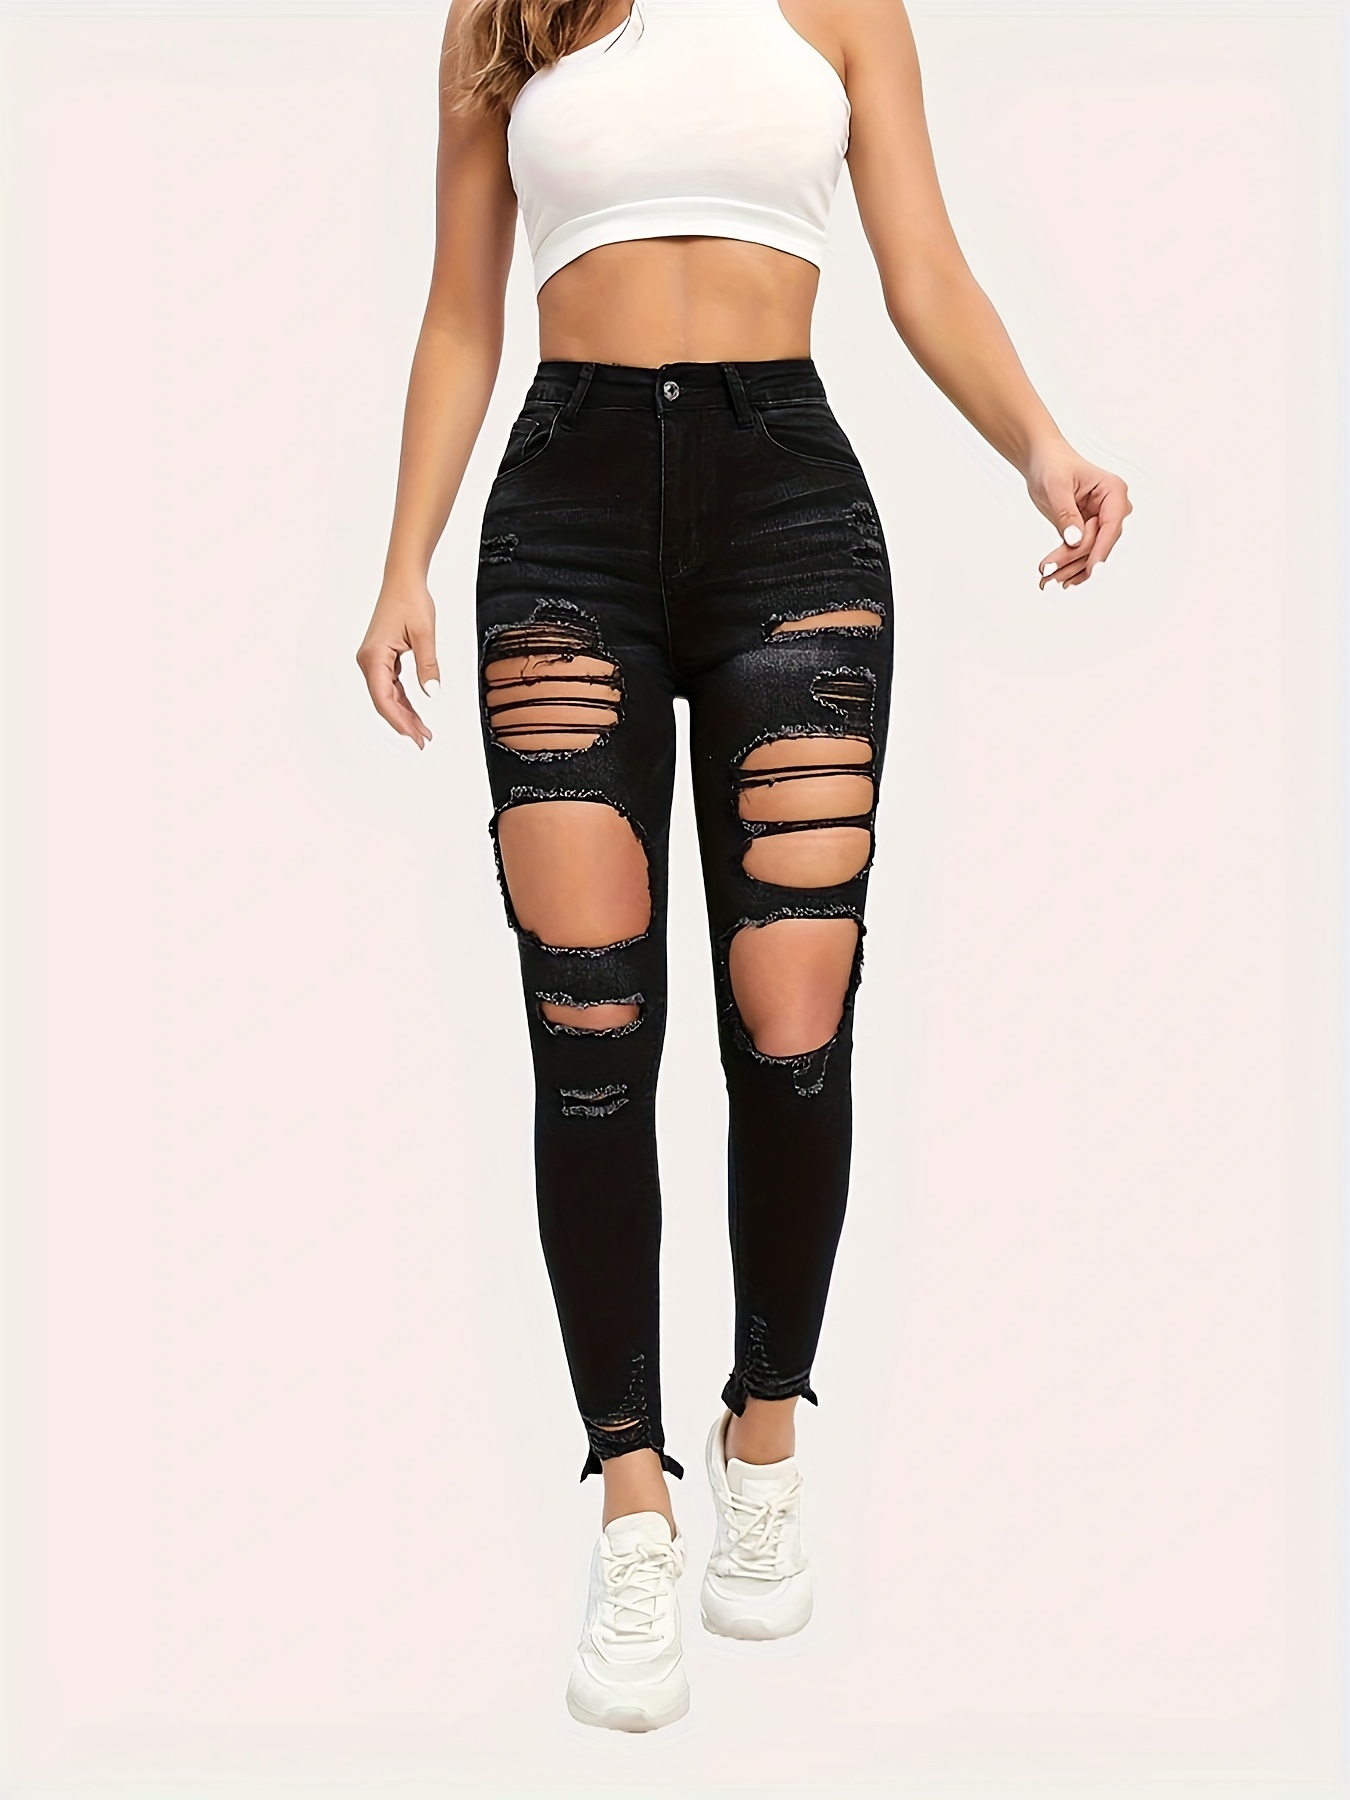 Women's Black Ripped Skinny Jeans, Ripped Holes Skinny Jeans, Girl's Y2K  Style Jeans